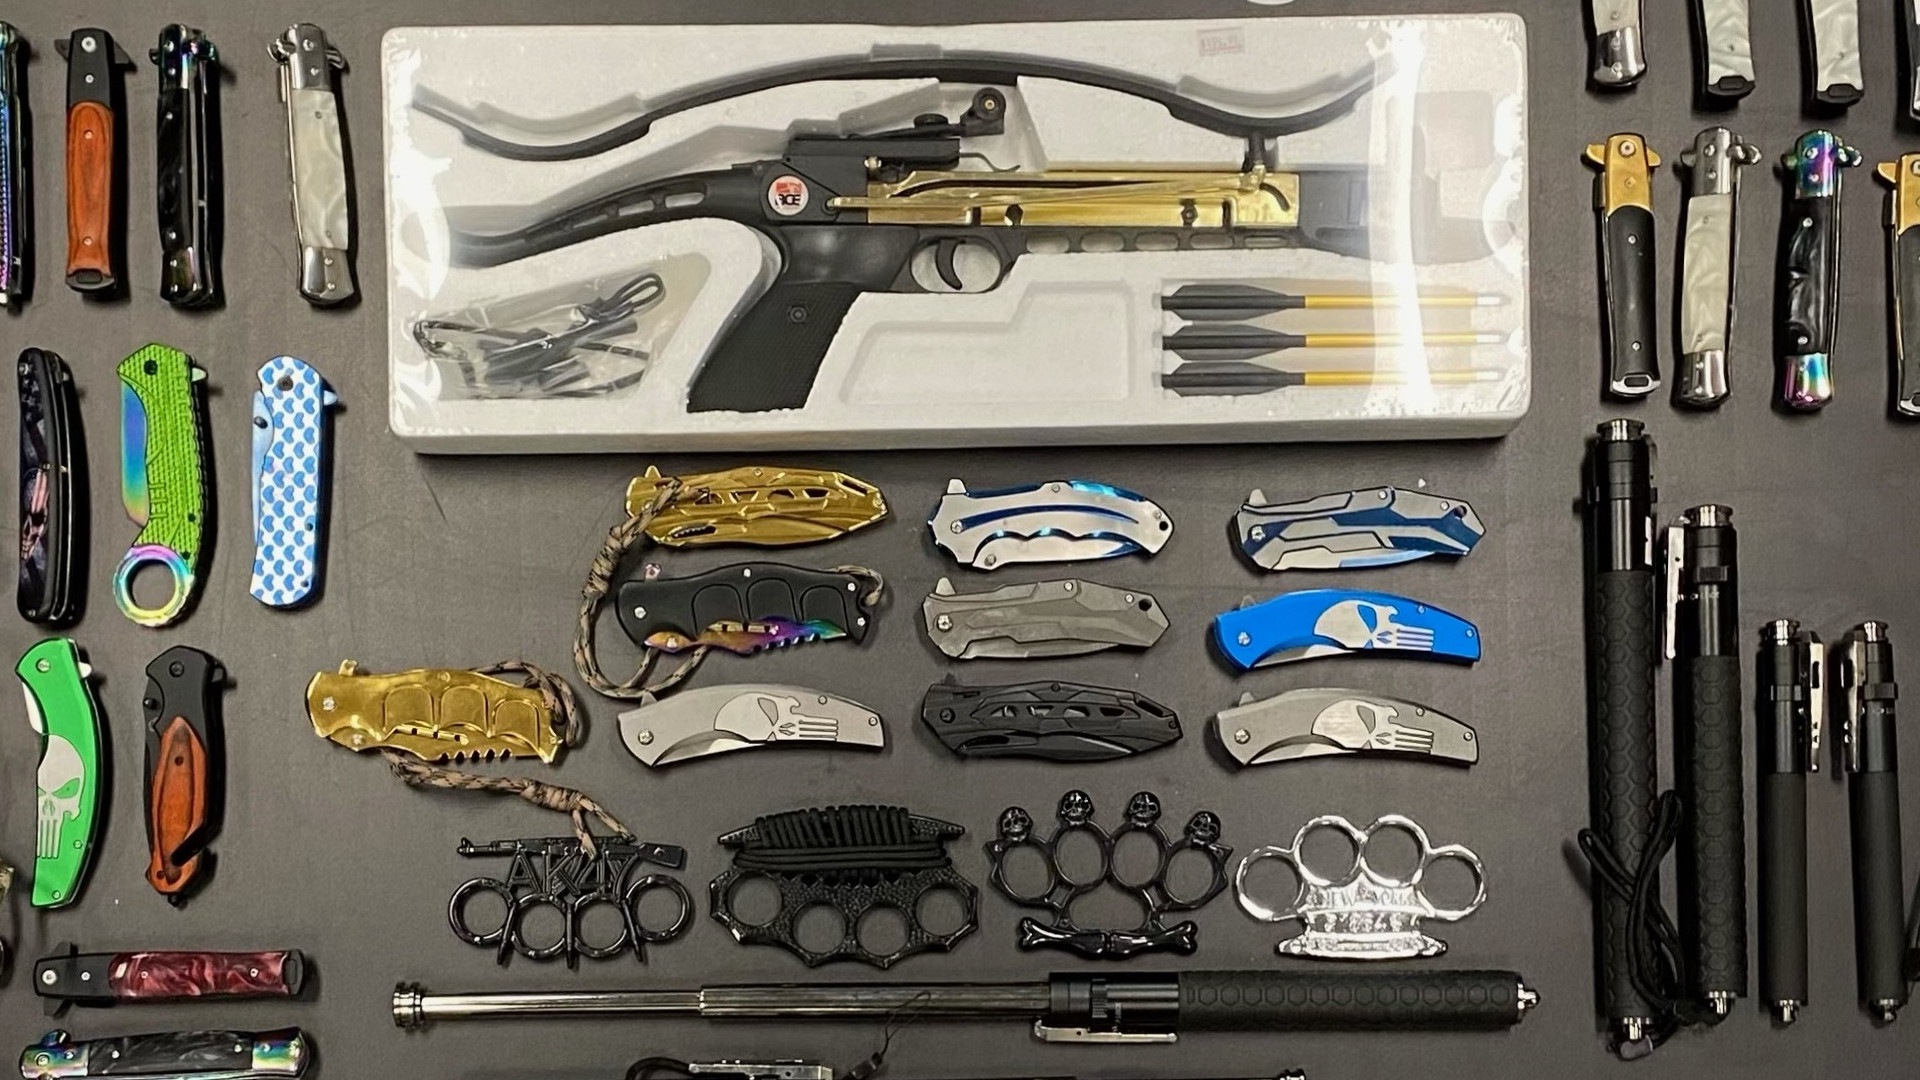 Brass knuckles, flick knives and other illegal weapons seized at